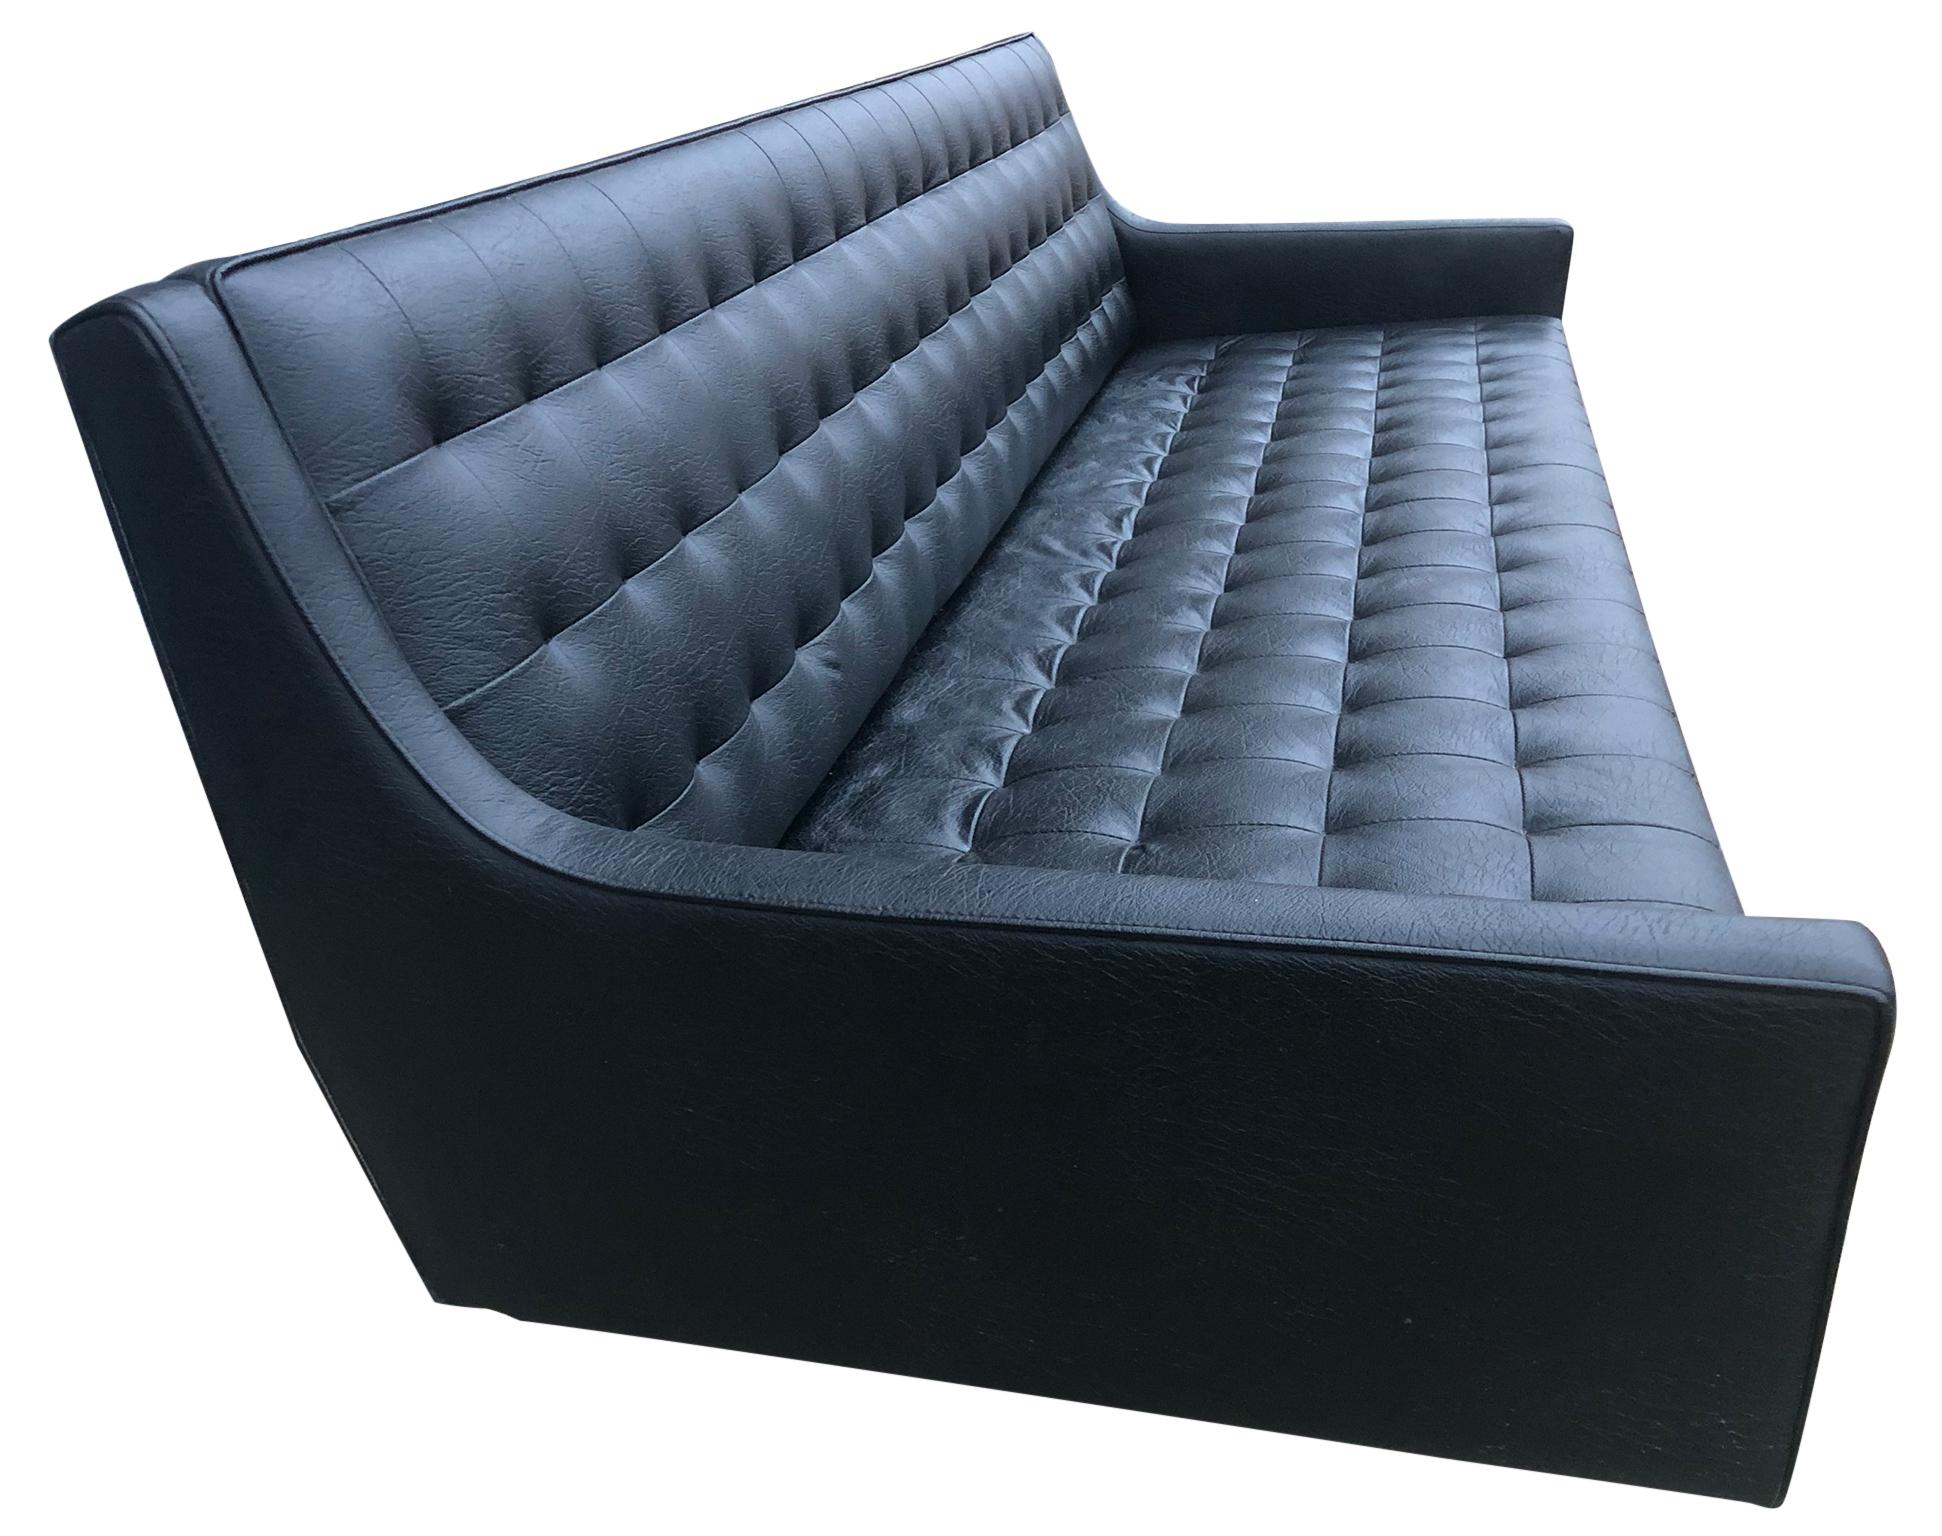 Mid-Century Modern Midcentury Black Faux Leather Vinyl Tufted Long low Sofa by Patrician